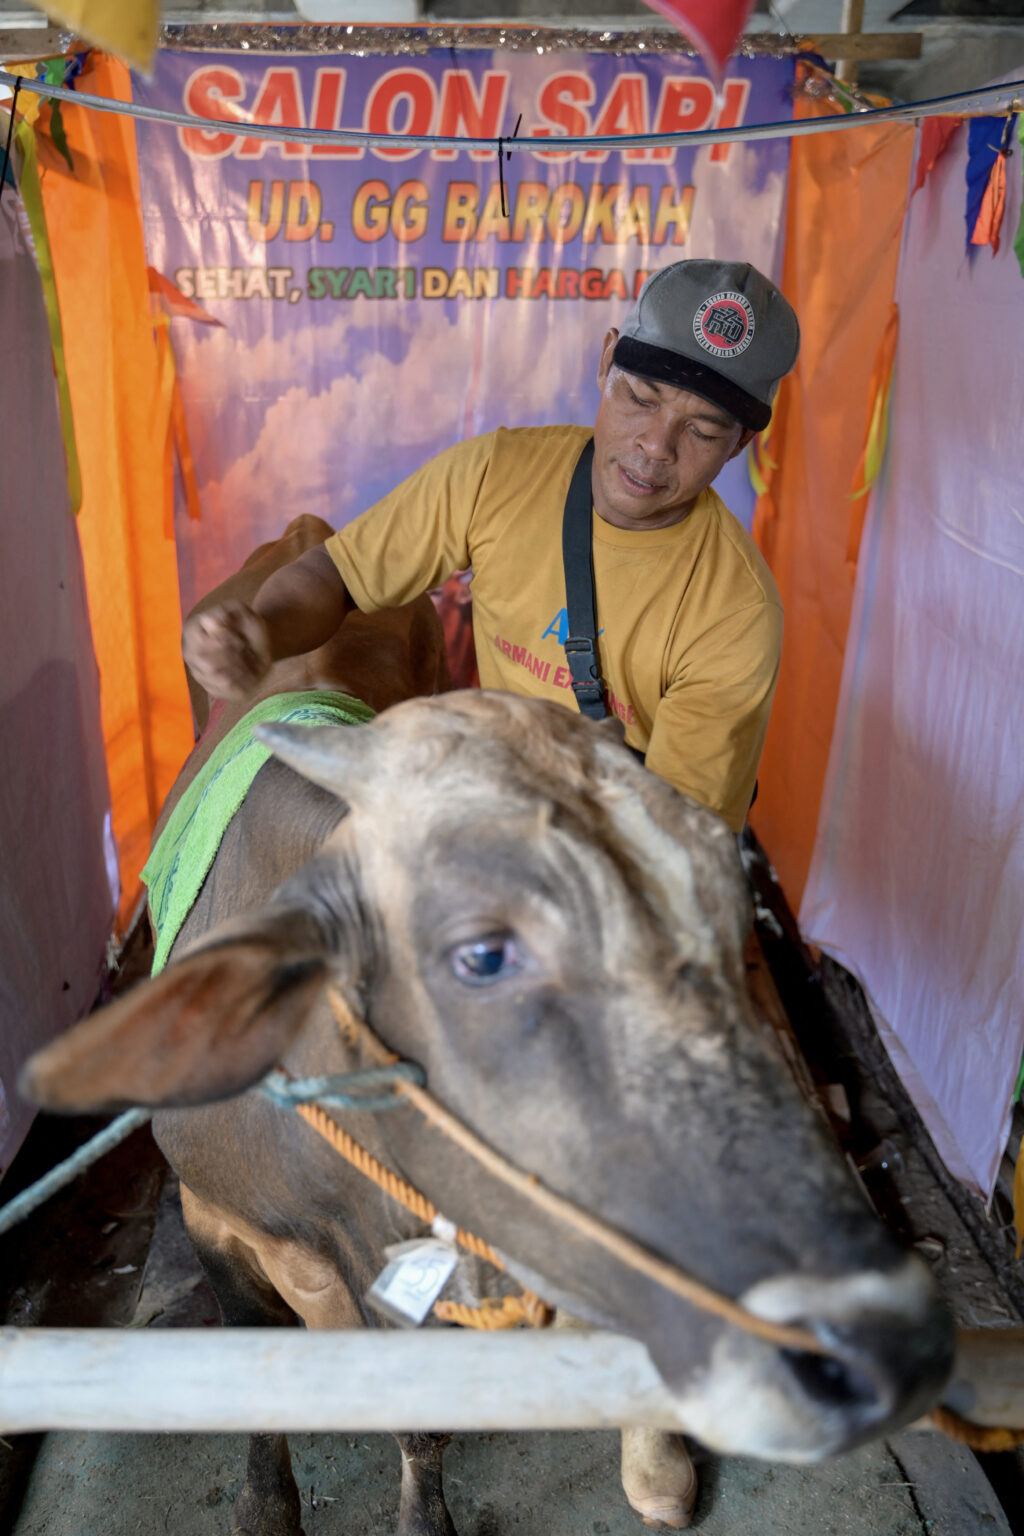 Sumarwan massages a brown cow at his "cow salon" in a makeshift livestock market in Jakarta on June 12, 2024, ahead of the Islamic holiday of Eid al-Adha when the animals are slaughtered and the meat shared with the poor. Under a highway in the Indonesian capital Jakarta, a brown cow stood calmly as masseur Sumarwan got to work, clenching his fist to beat the animal's legs and help it relax ahead of its sacrifice. | AFP